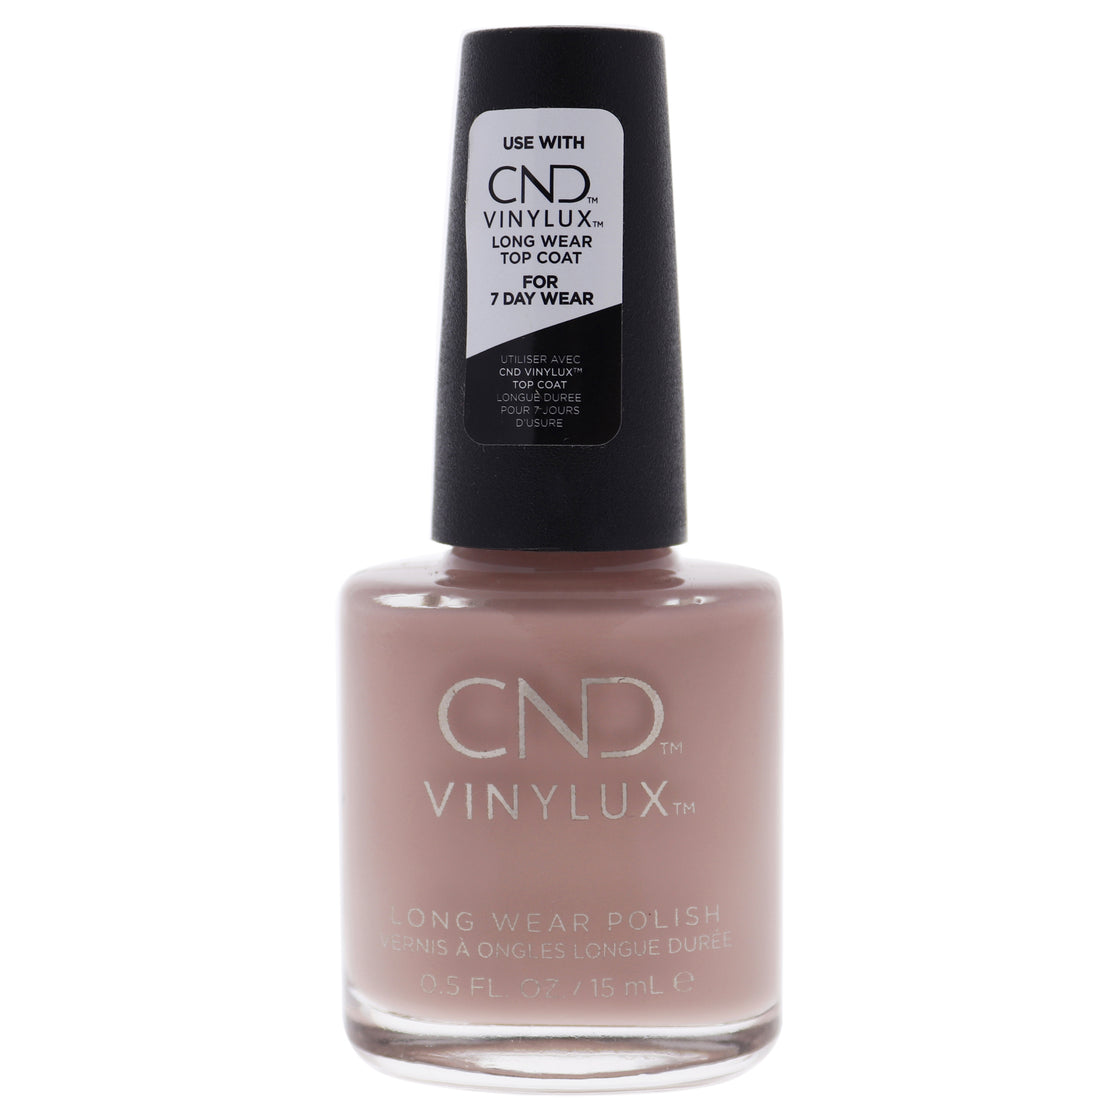 Vinylux Weekly Polish - 263 Nude Knickers by CND for Women - 0.5 oz Nail Polish